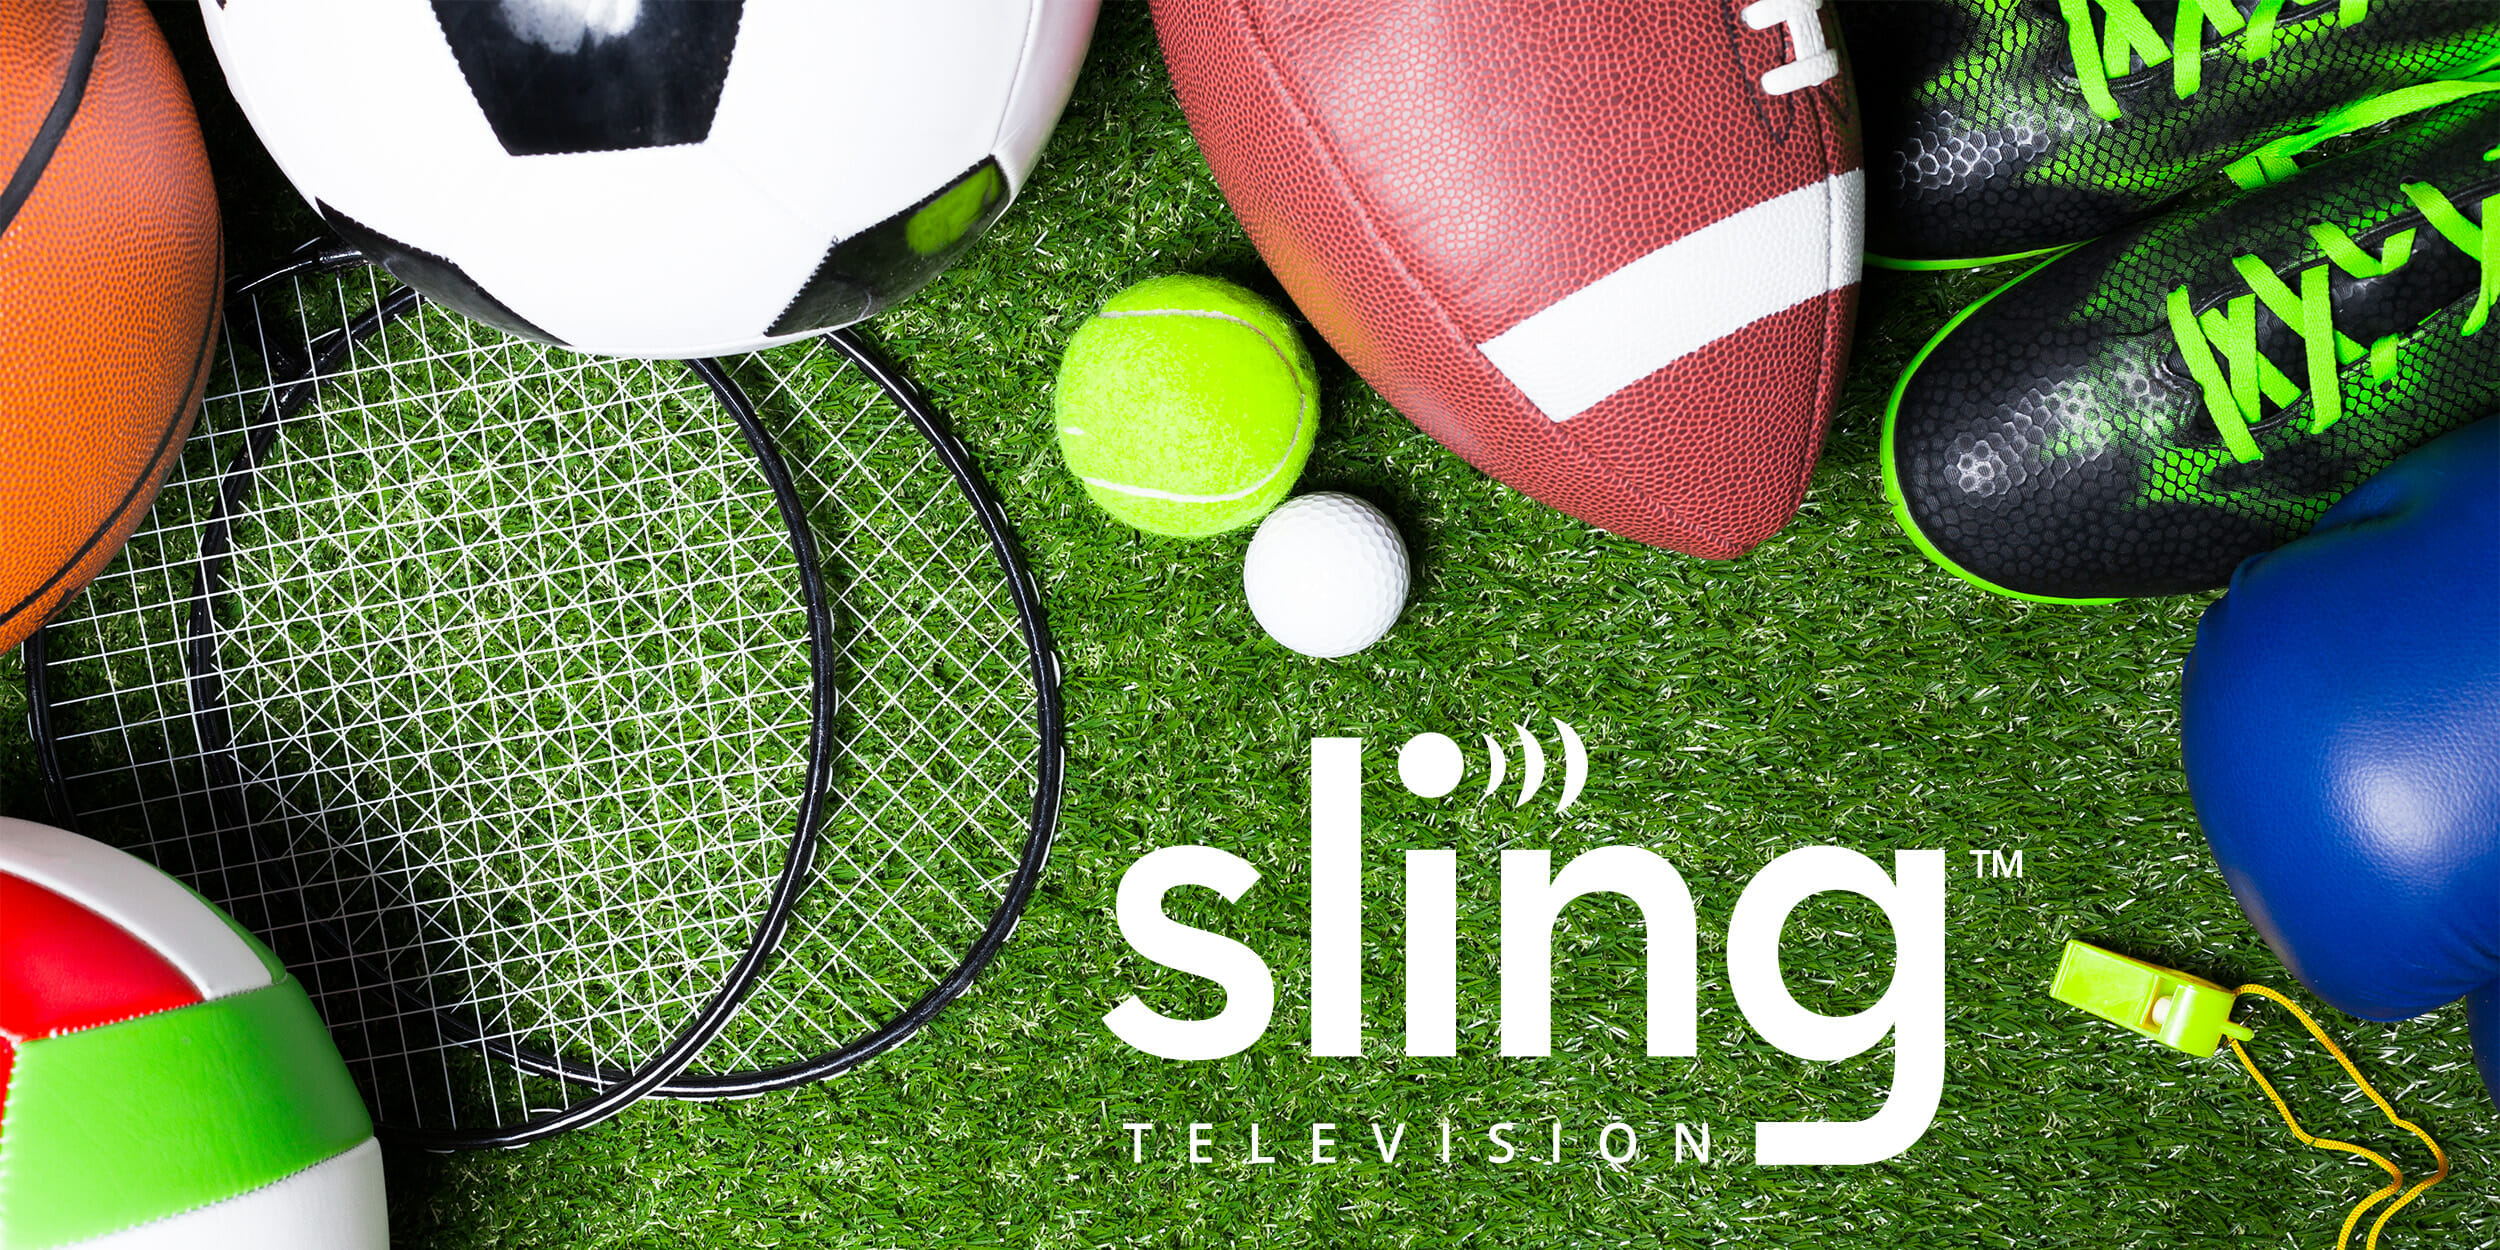 Watch ESPN on Sling TV The Best Deal for Streaming ESPN